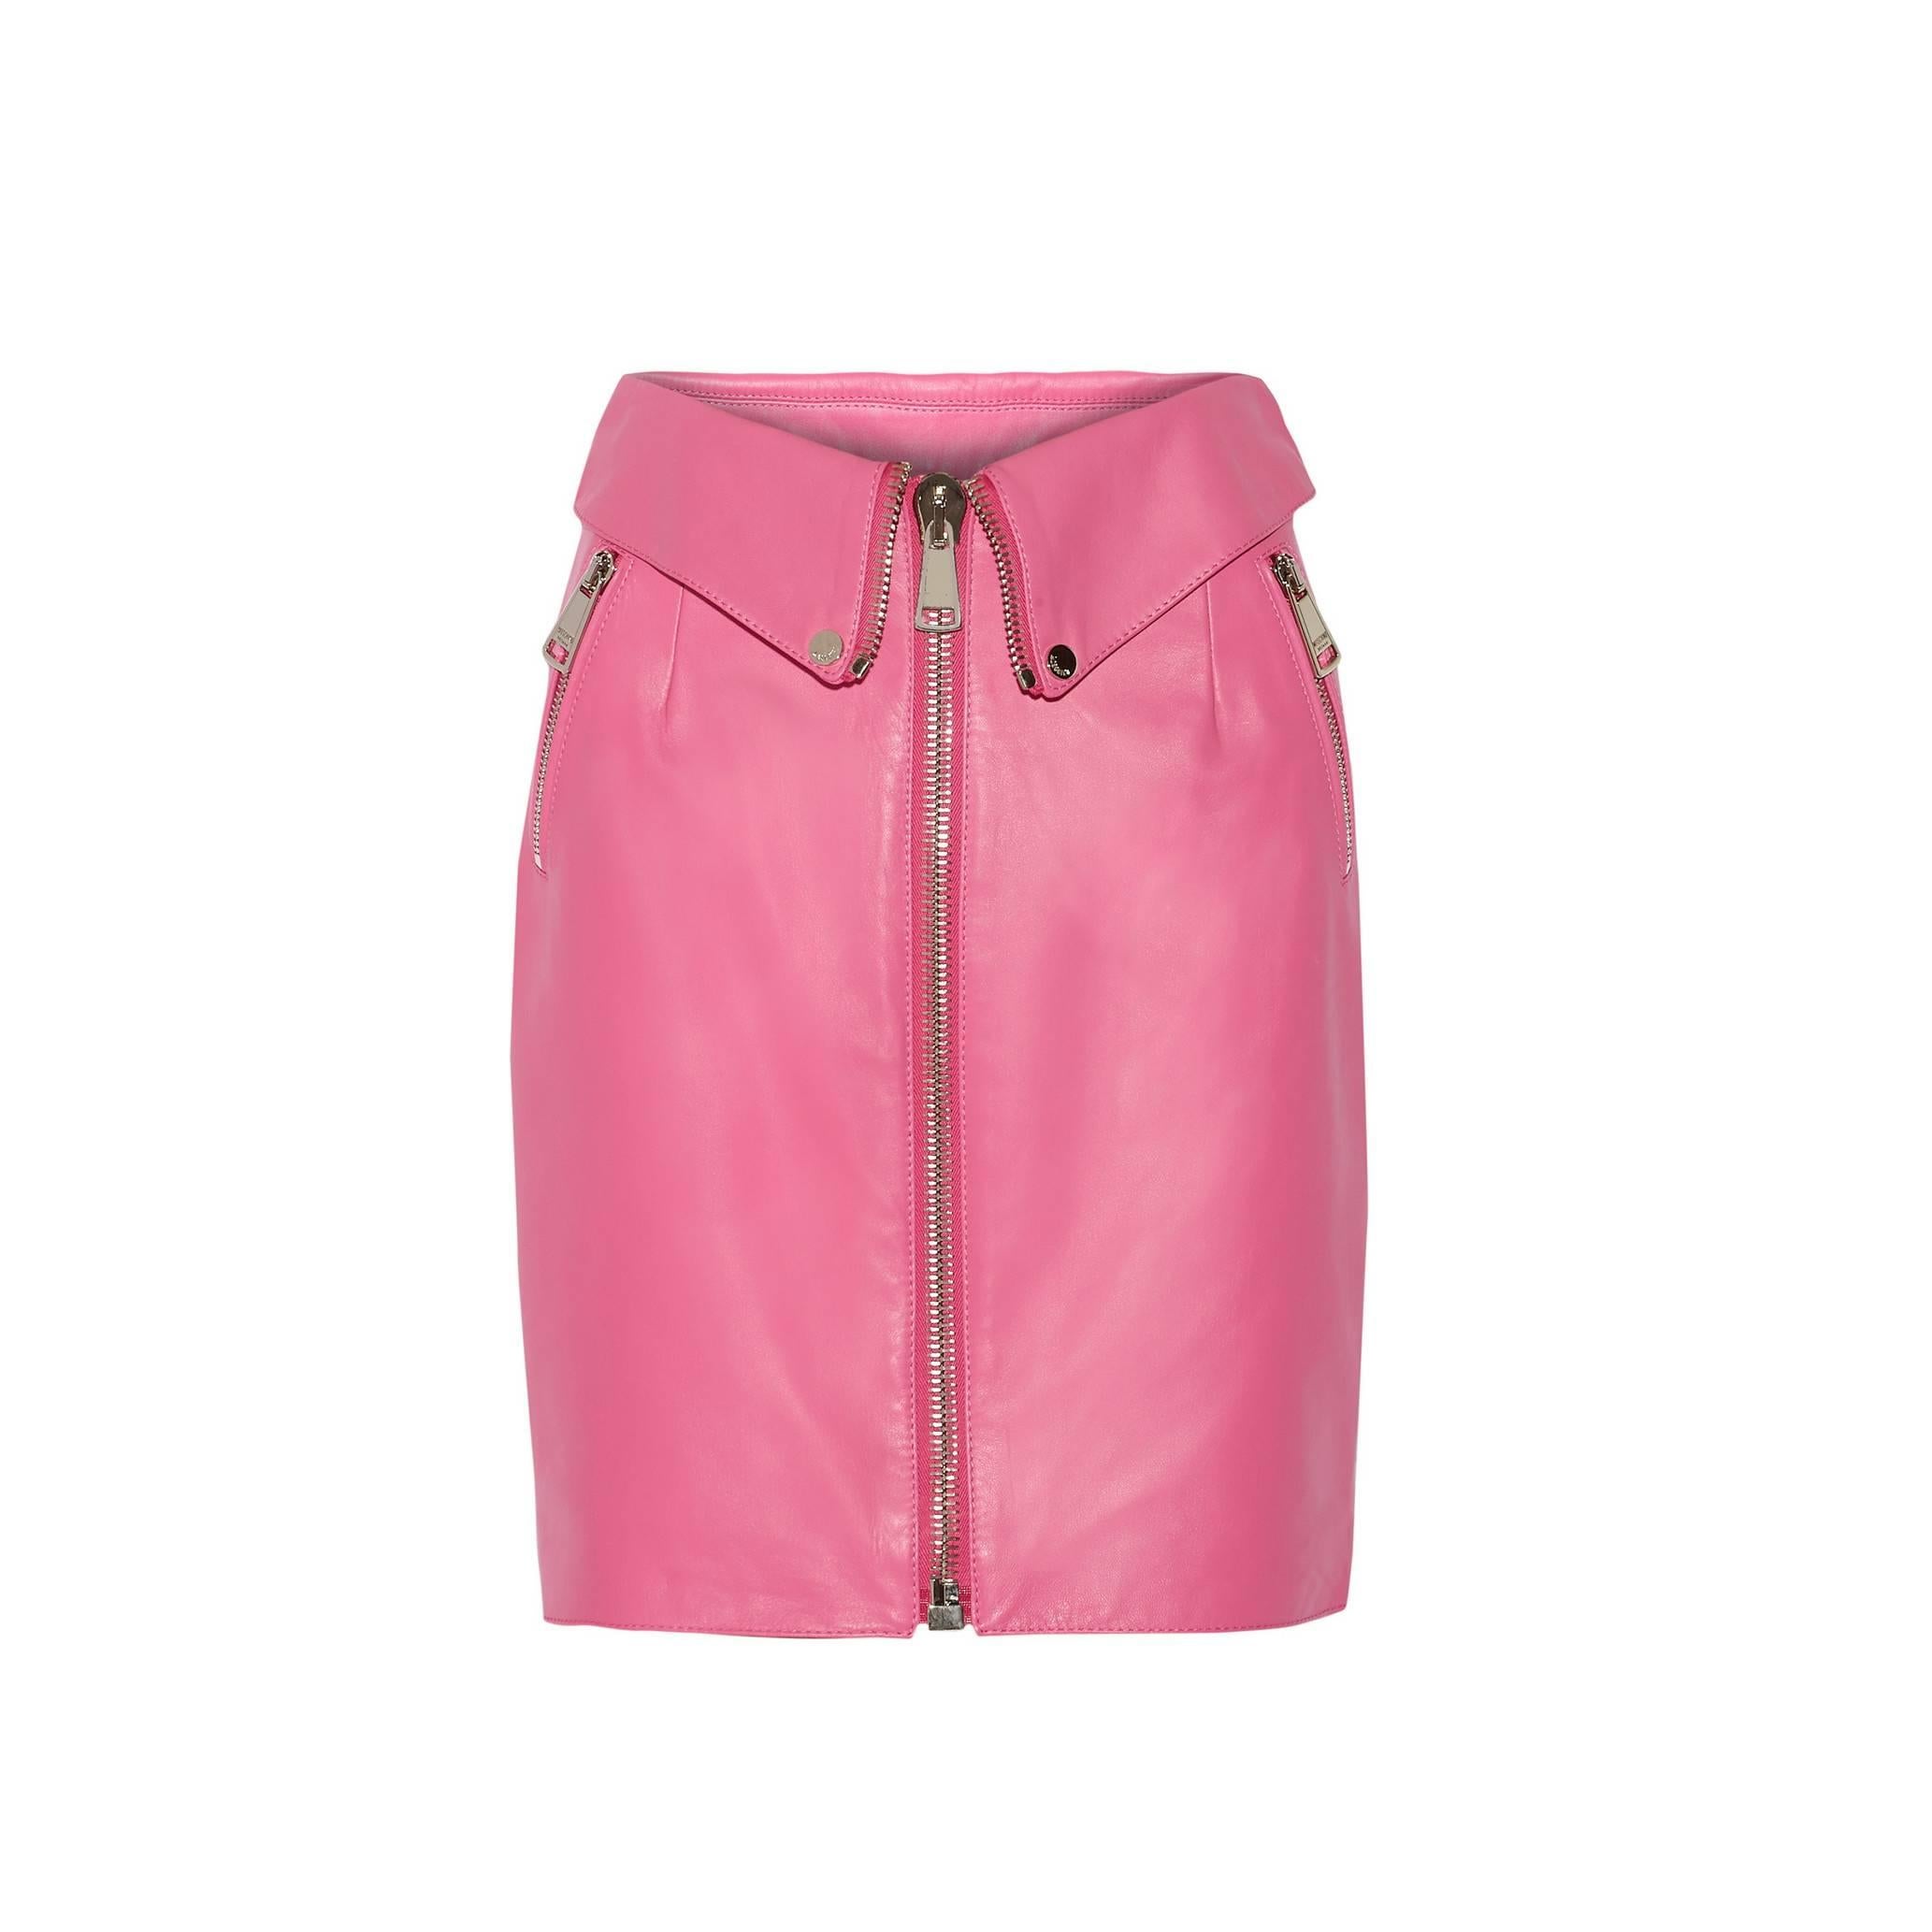 Moschino Bumble Gum Pink Leather Skirt